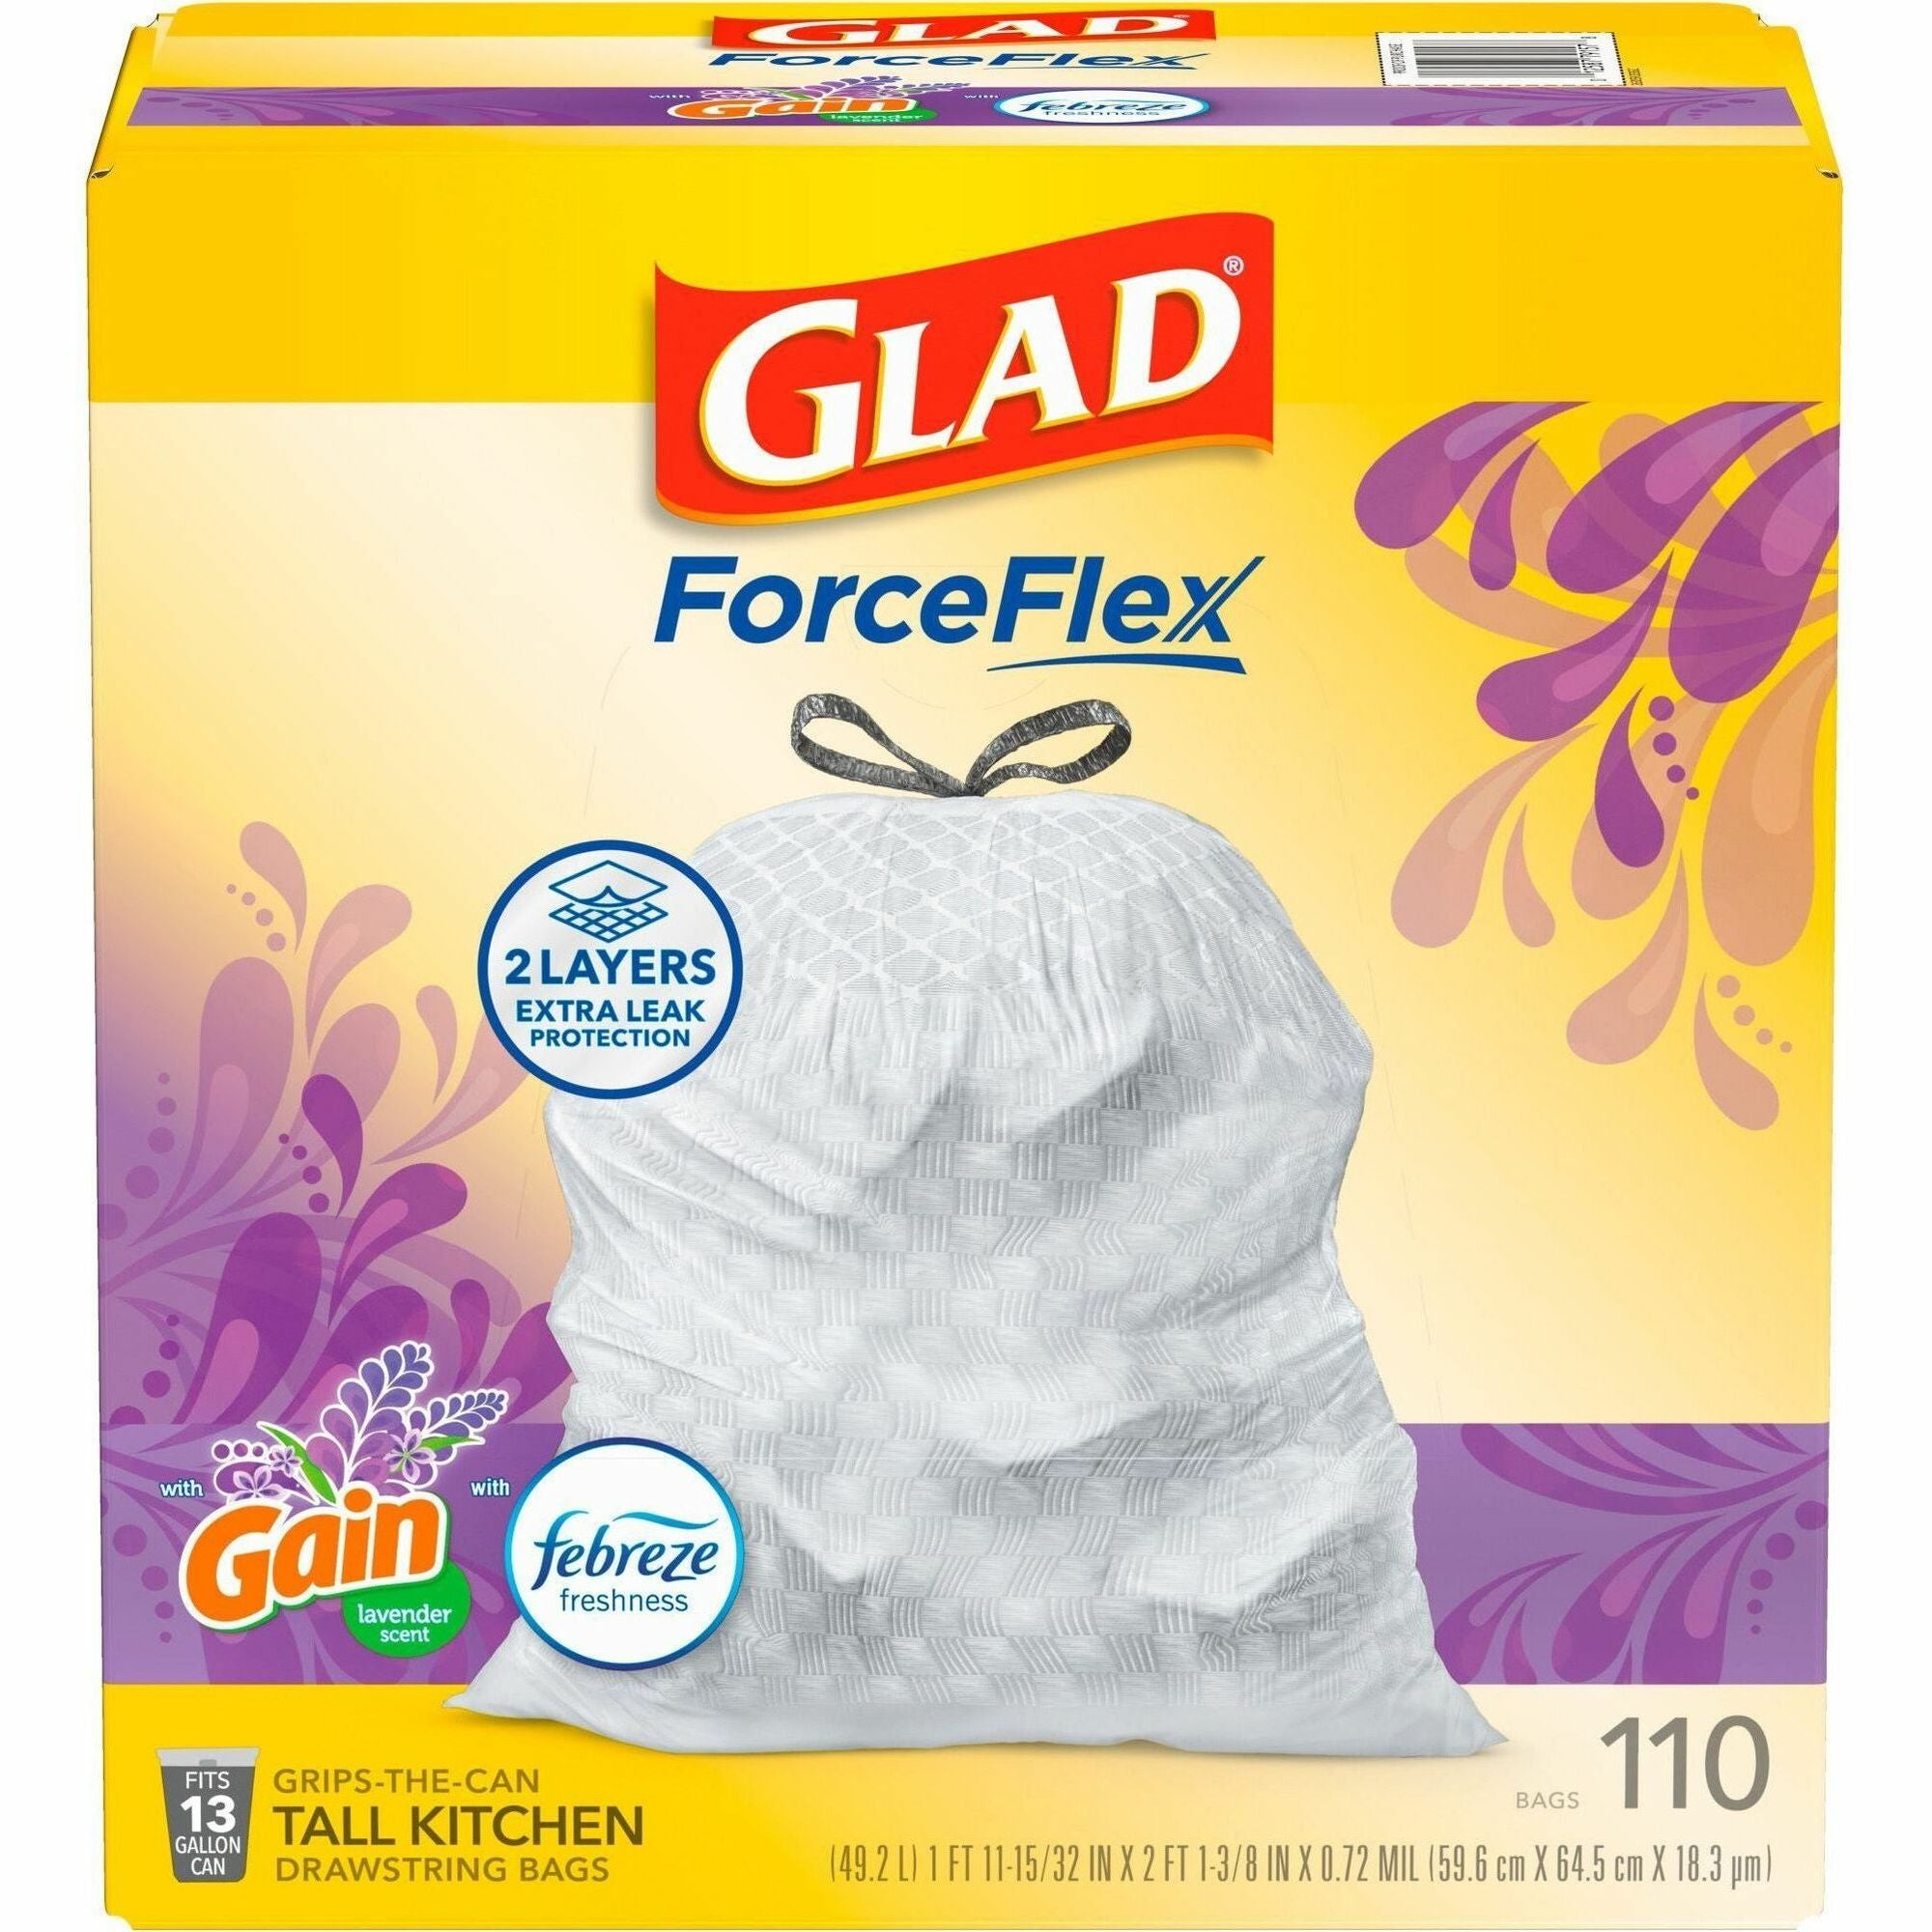 Glad ForceFlex Tall Kitchen Drawstring Trash Bags - Mediterranean Lavender with Febreze Freshness - 13 gal Capacity - 23.75" Width x 25.38" Length - 0.72 mil (18 Micron) Thickness - Drawstring Closure - White - 1/Box - 110 Per Box - Home, Office - 1